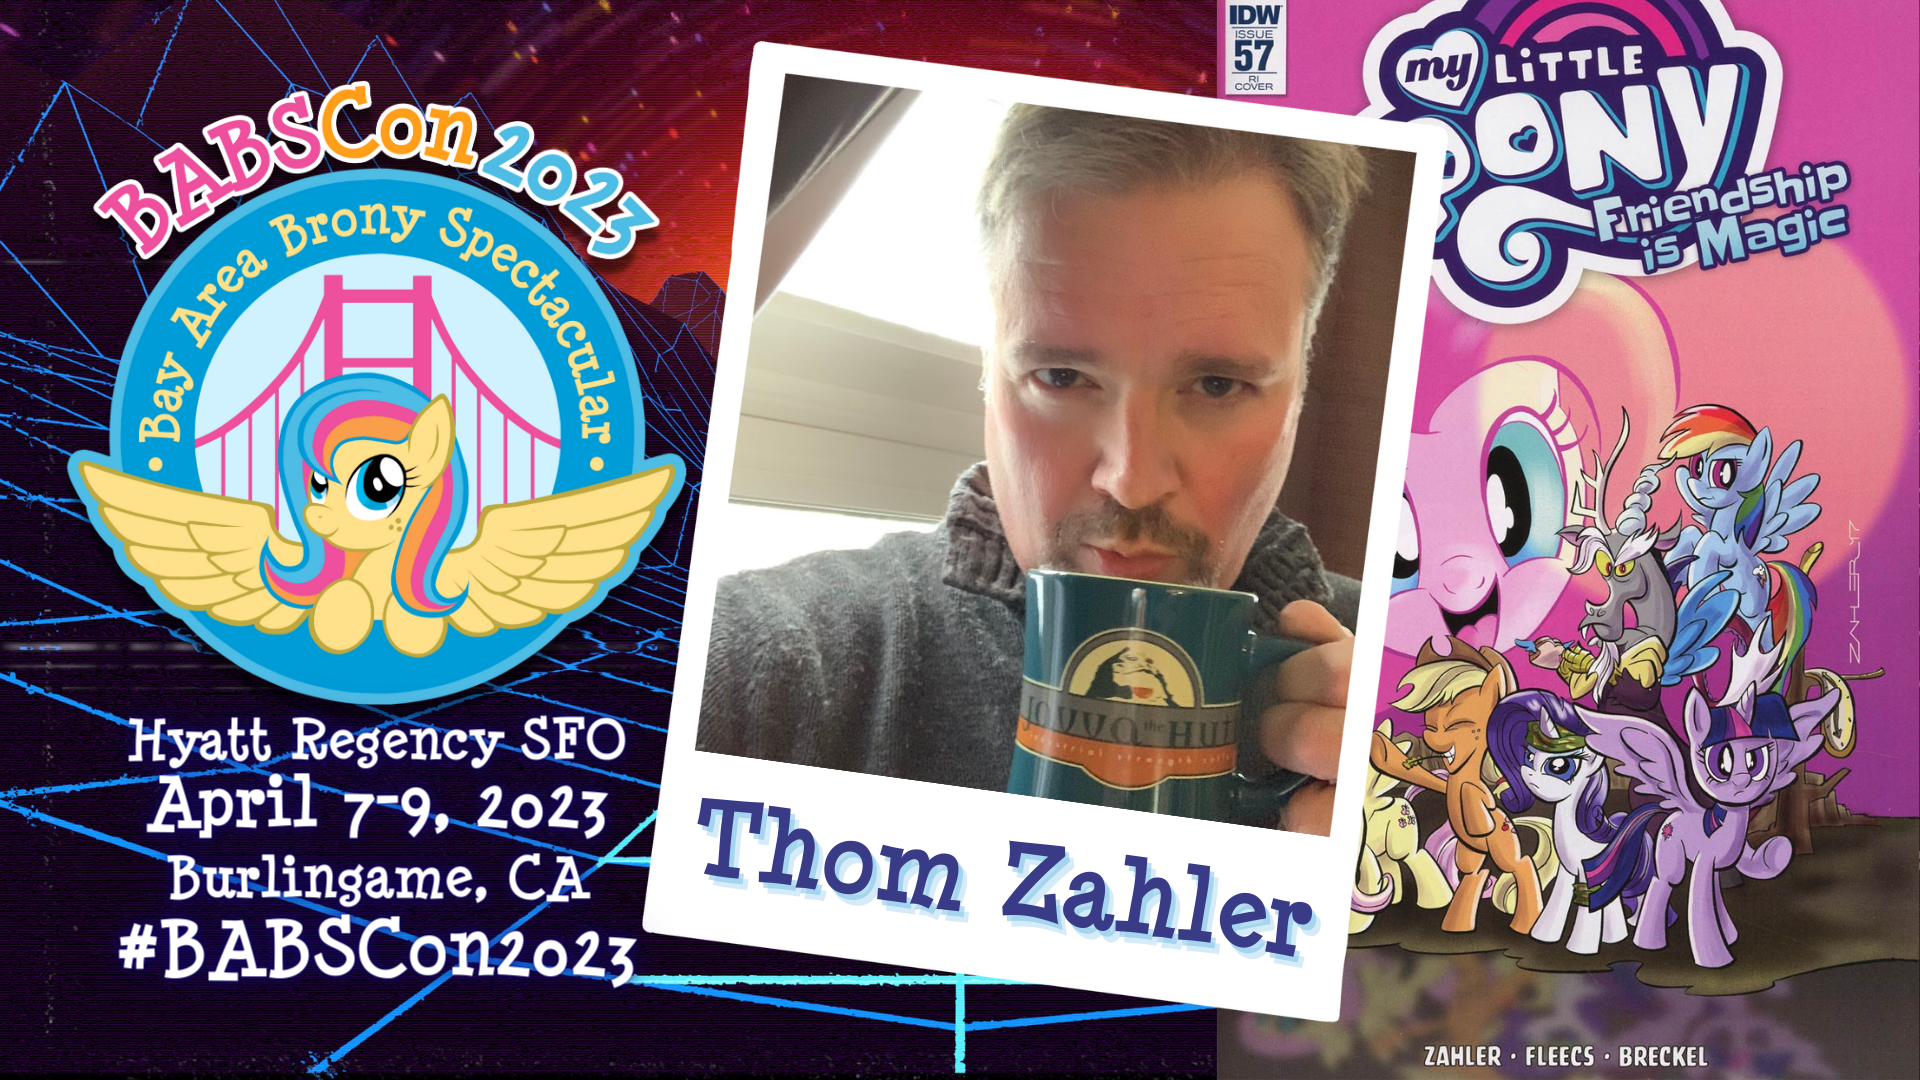 BABSCon 2023 is Up, Up, and Away with Thom Zahler!